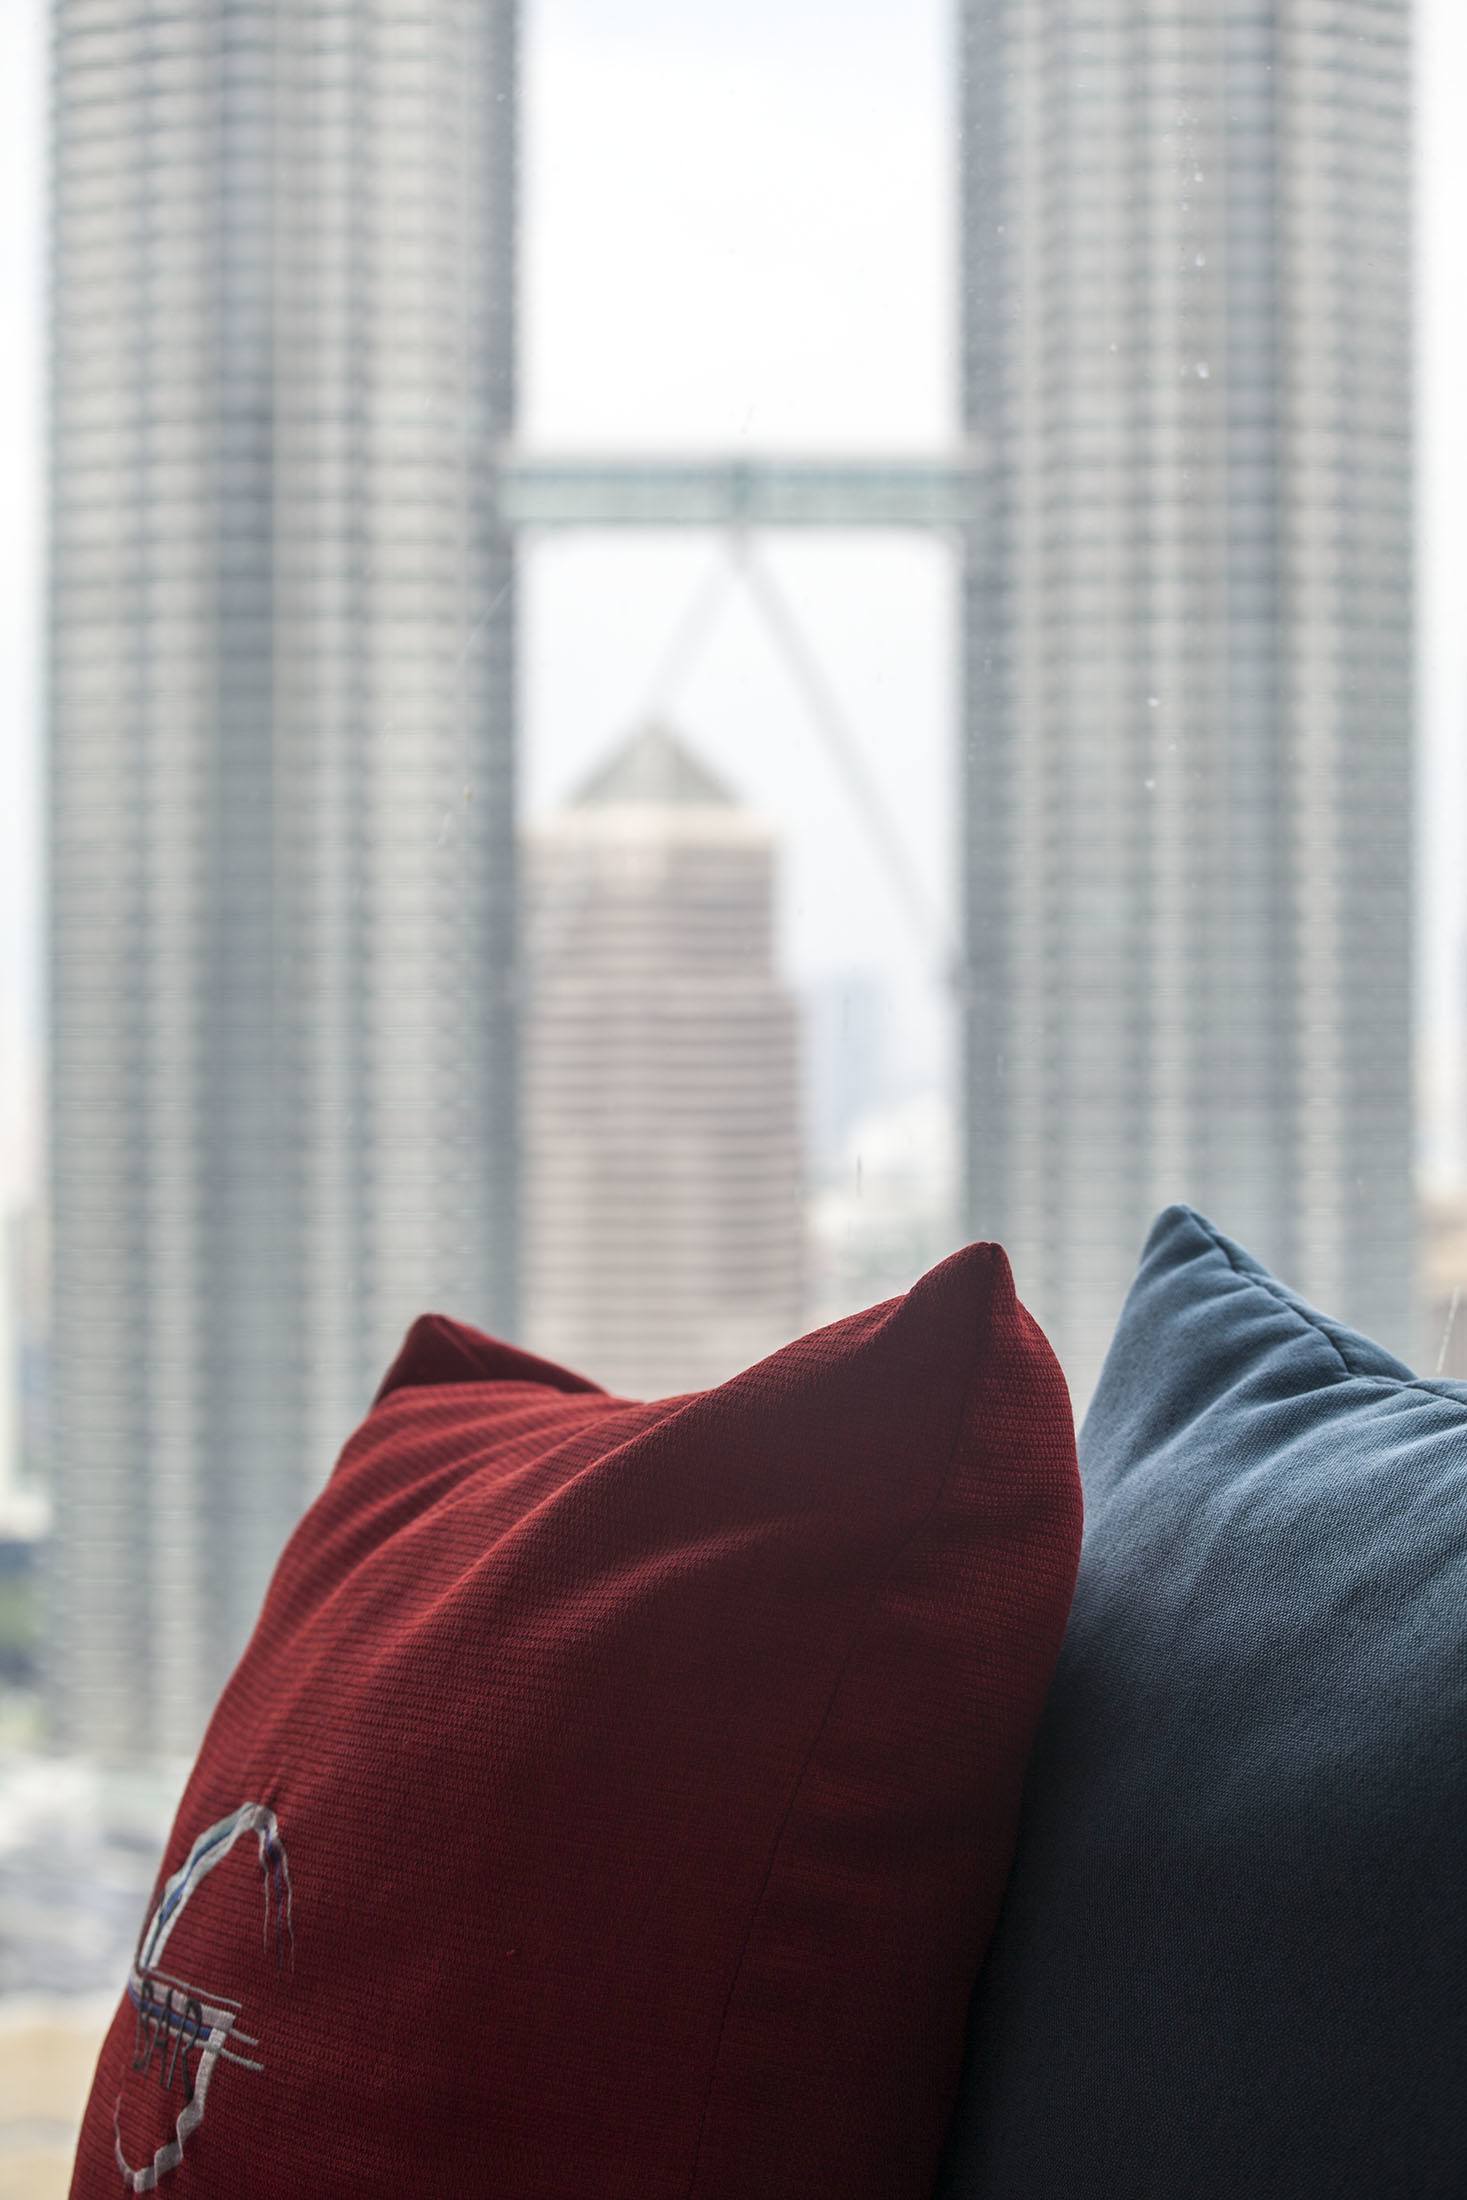 Pillows by a window of a hotel looking out at Petronas Towers in Kuala Lumpur Malaysia